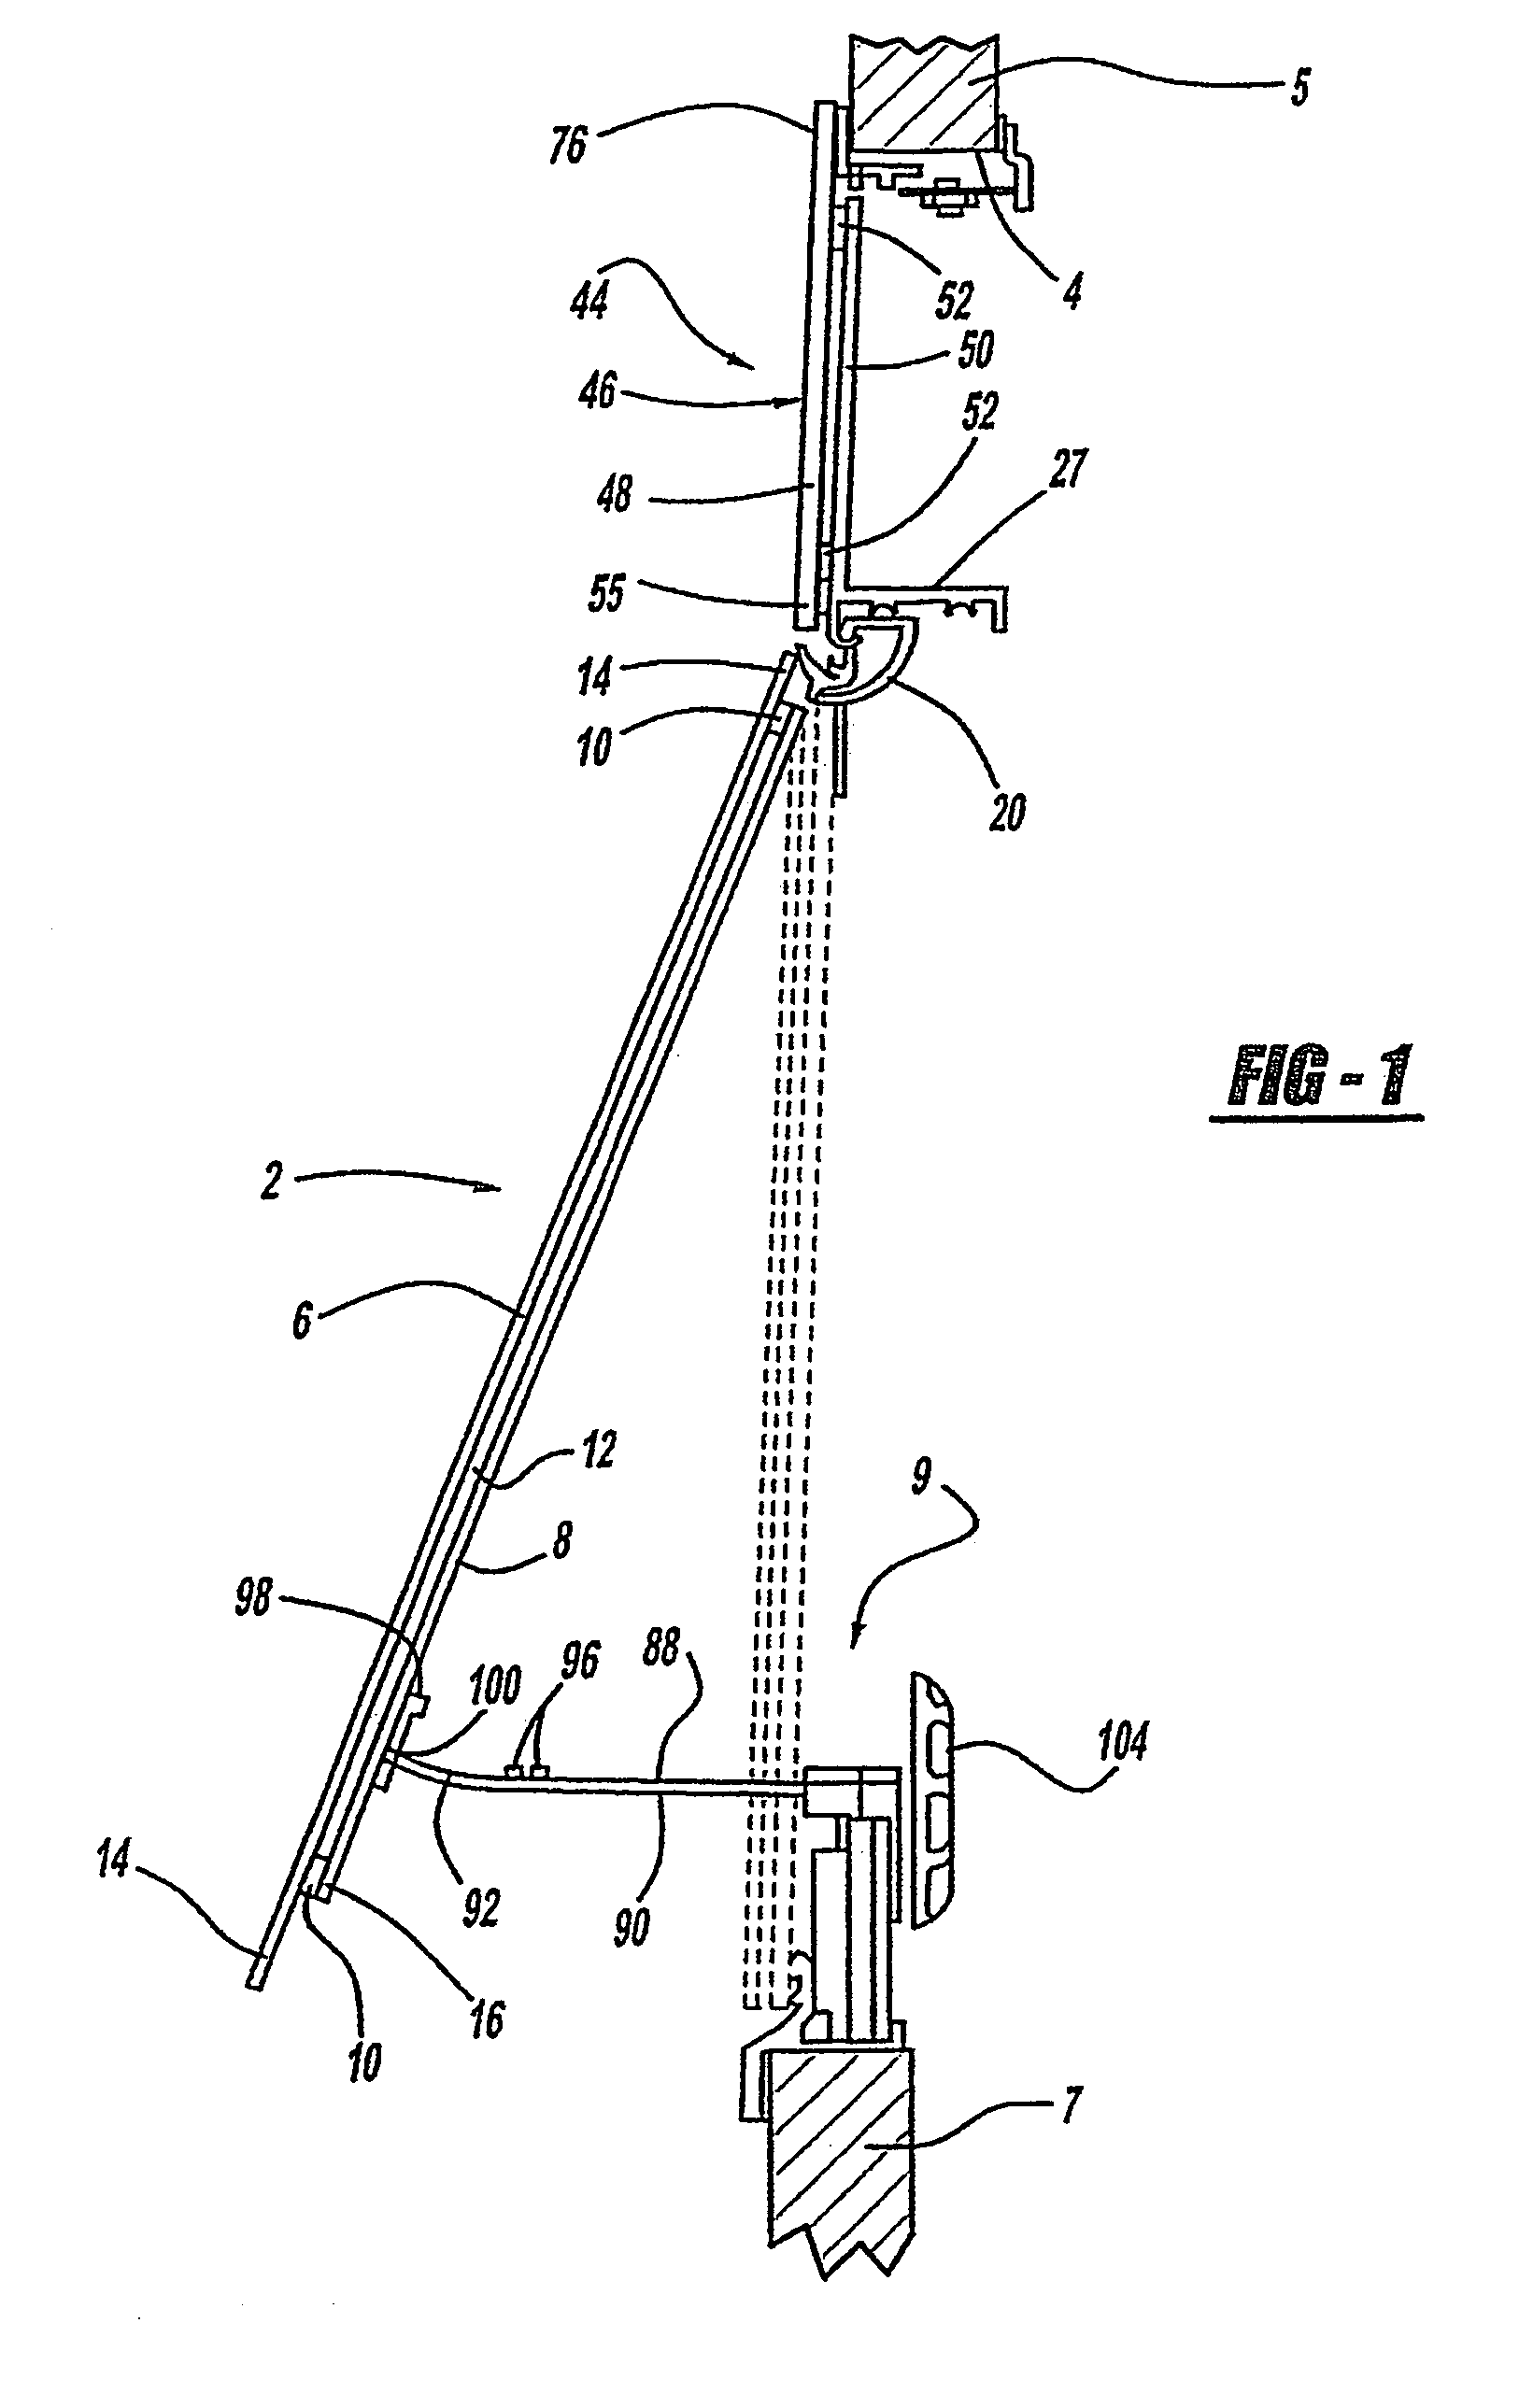 Awning-type insulated glazing assembly